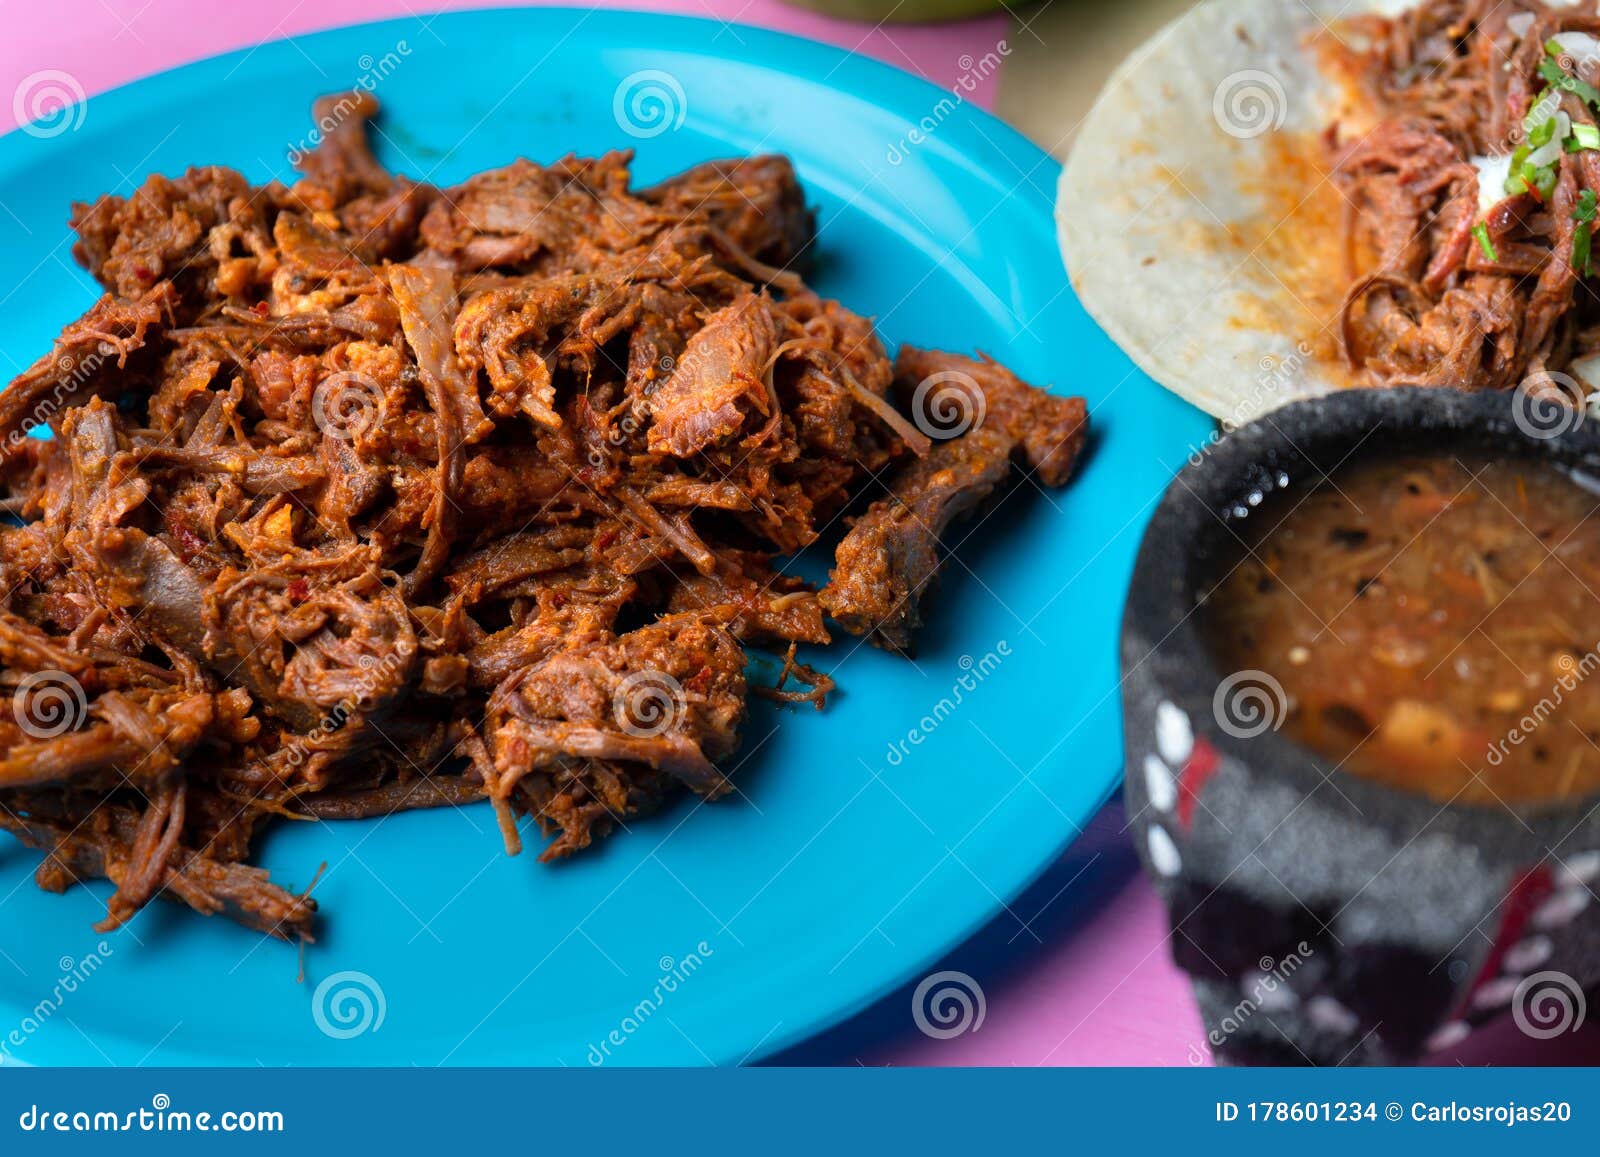 mexican beef barbacoa tacos on colorful background